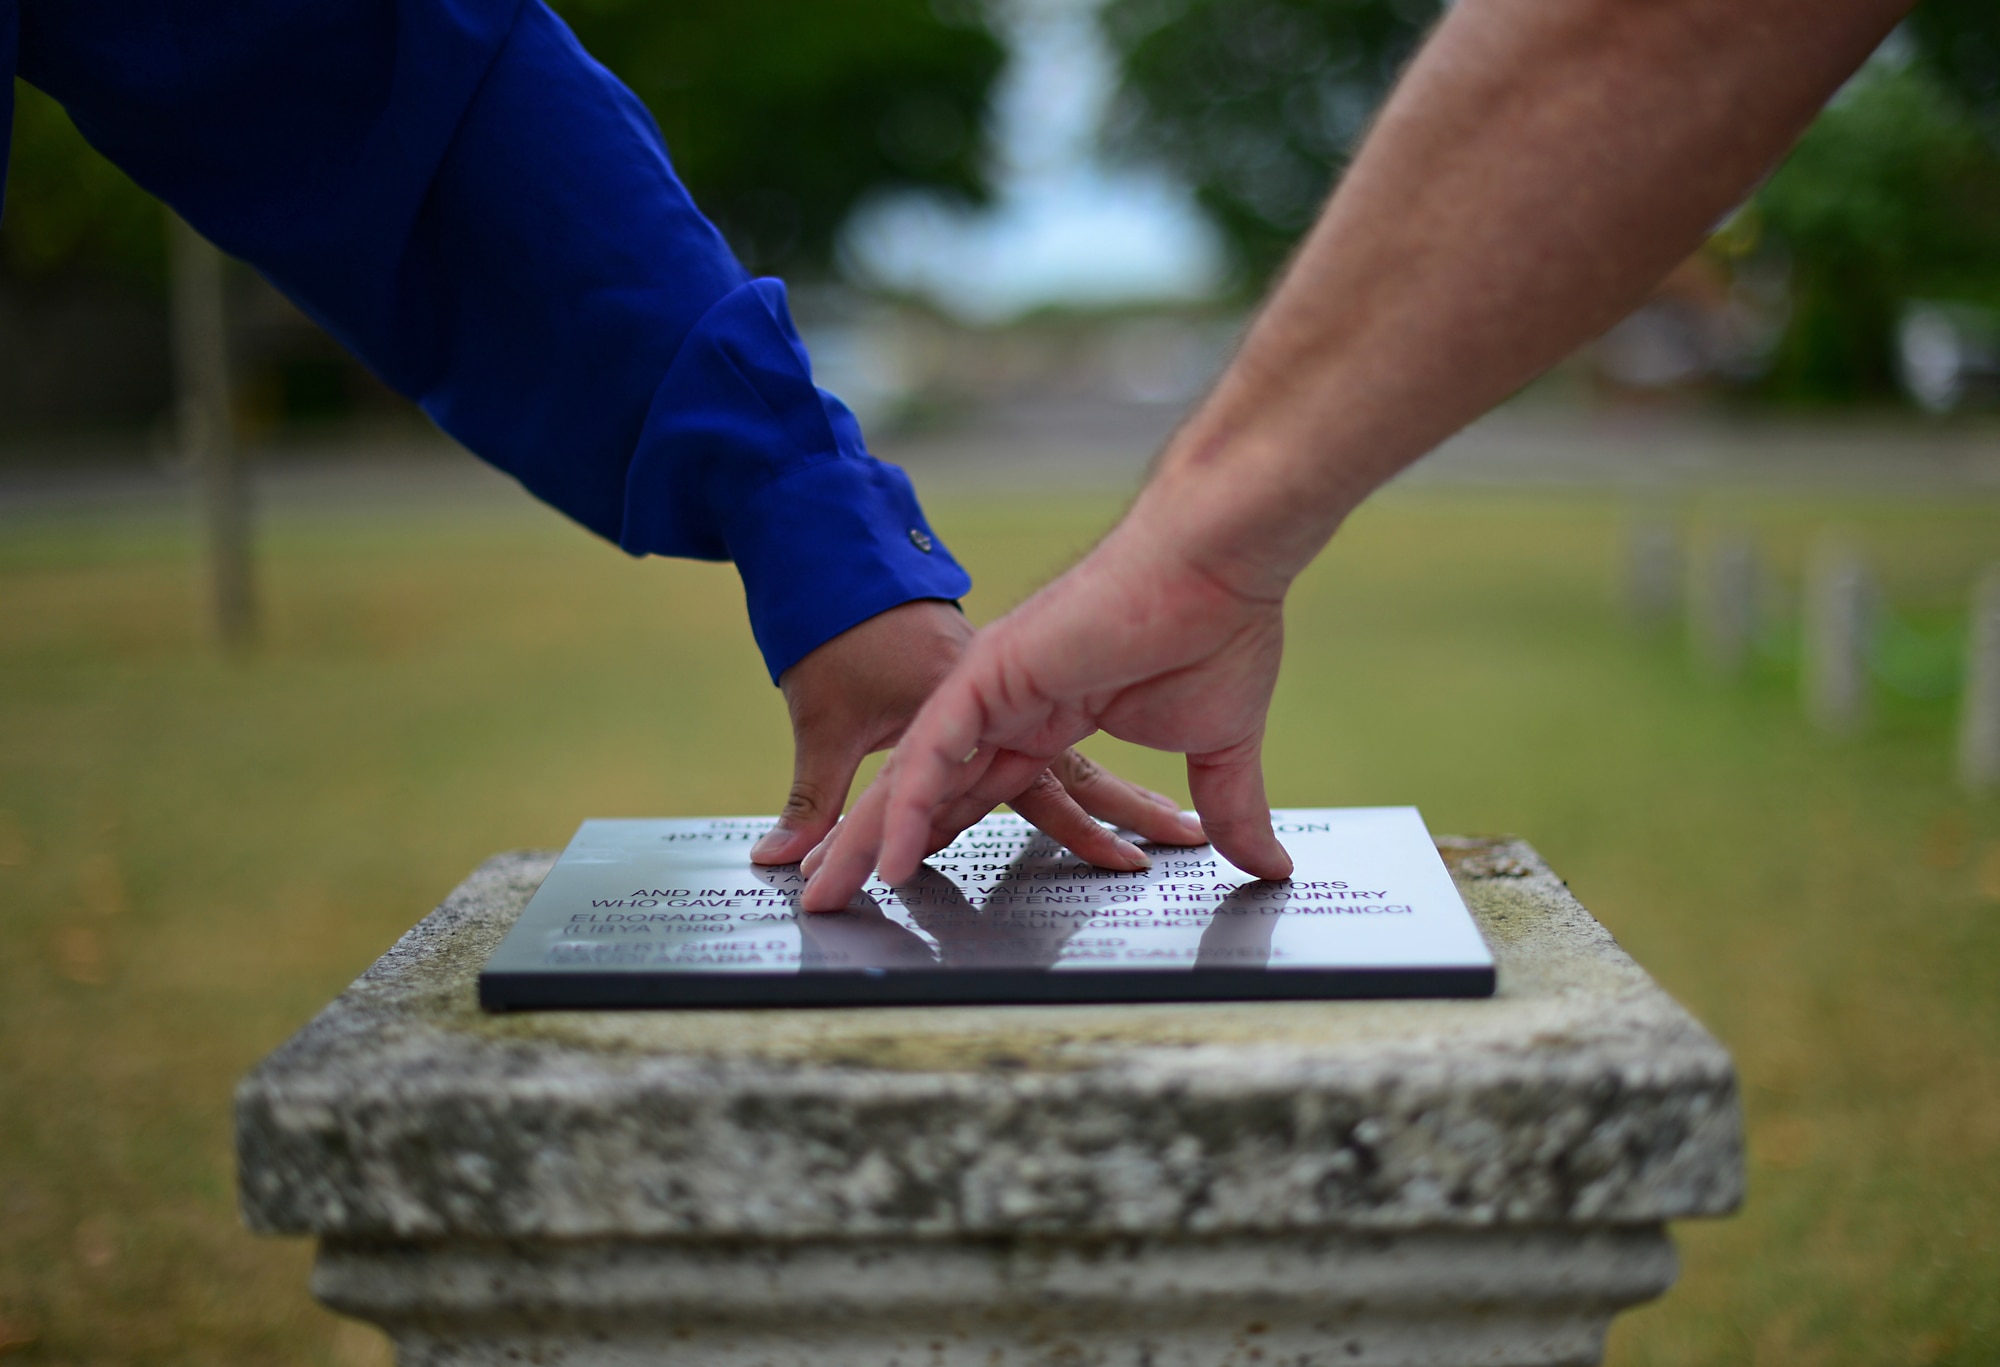 Josh Kelley, a former Air Force Junior ROTC member, and his Father, Terry, apply pressure to a newly placed memorial plaque dedicated to the 495th Tactical Fighter Squadron, a deactivated fighter squadron, at Royal Air Force Lakenheath, England, June 19, 2015. Activated in 1977, the squadron functioned as a replacement training unit for the Liberty Wing’s 492nd, 493rd and 494th Fighter Squadrons that are active today. (U.S. Air Force photo by Senior Airman Erin O’Shea/Released)